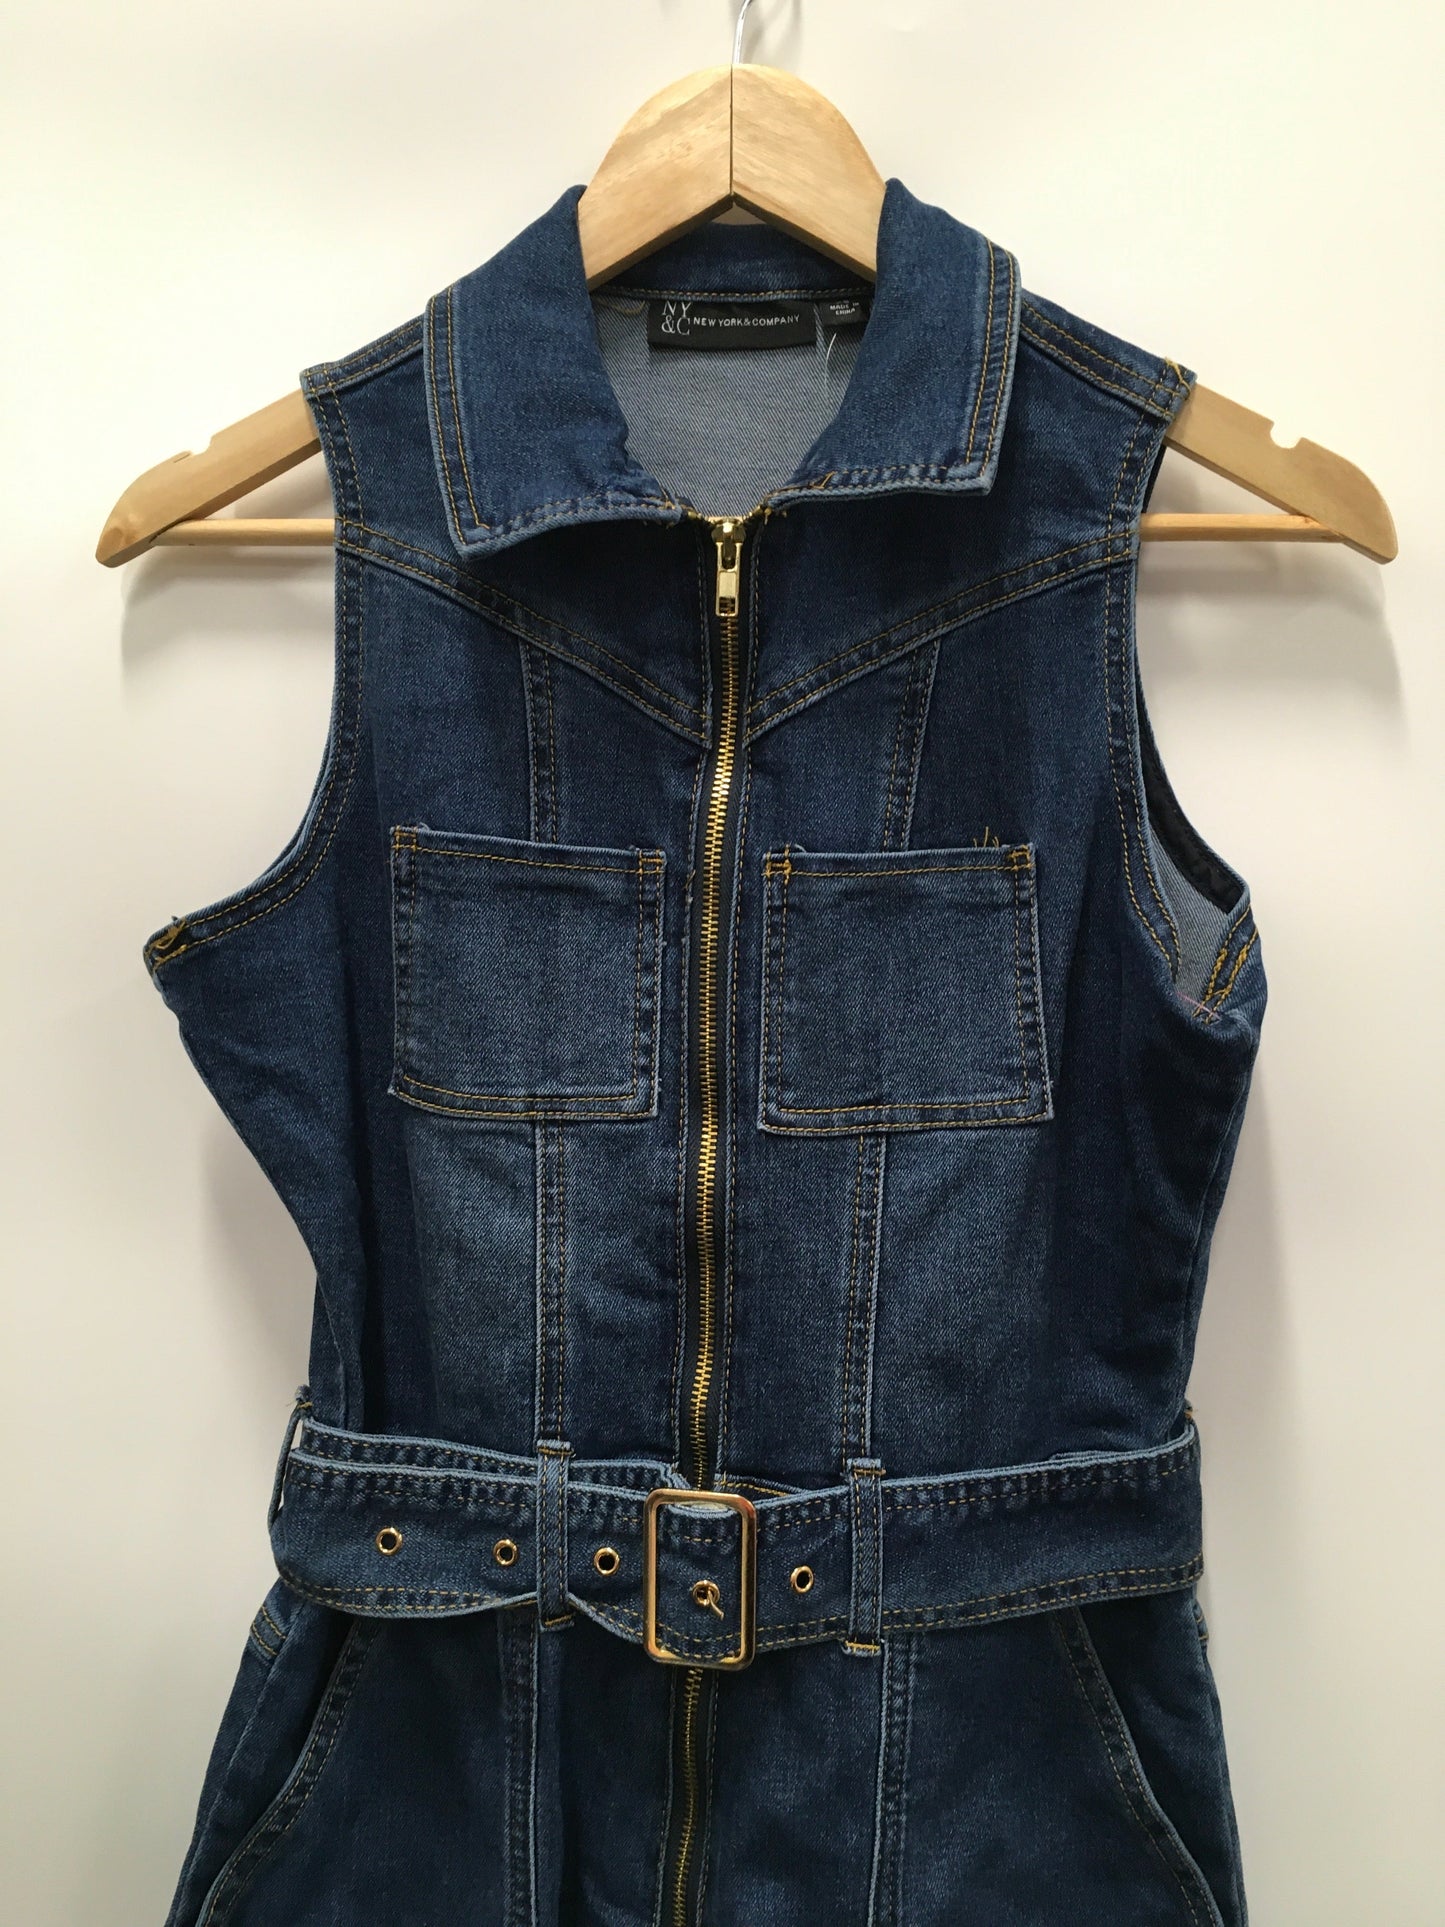 Blue Denim Jumpsuit New York And Co, Size Xs